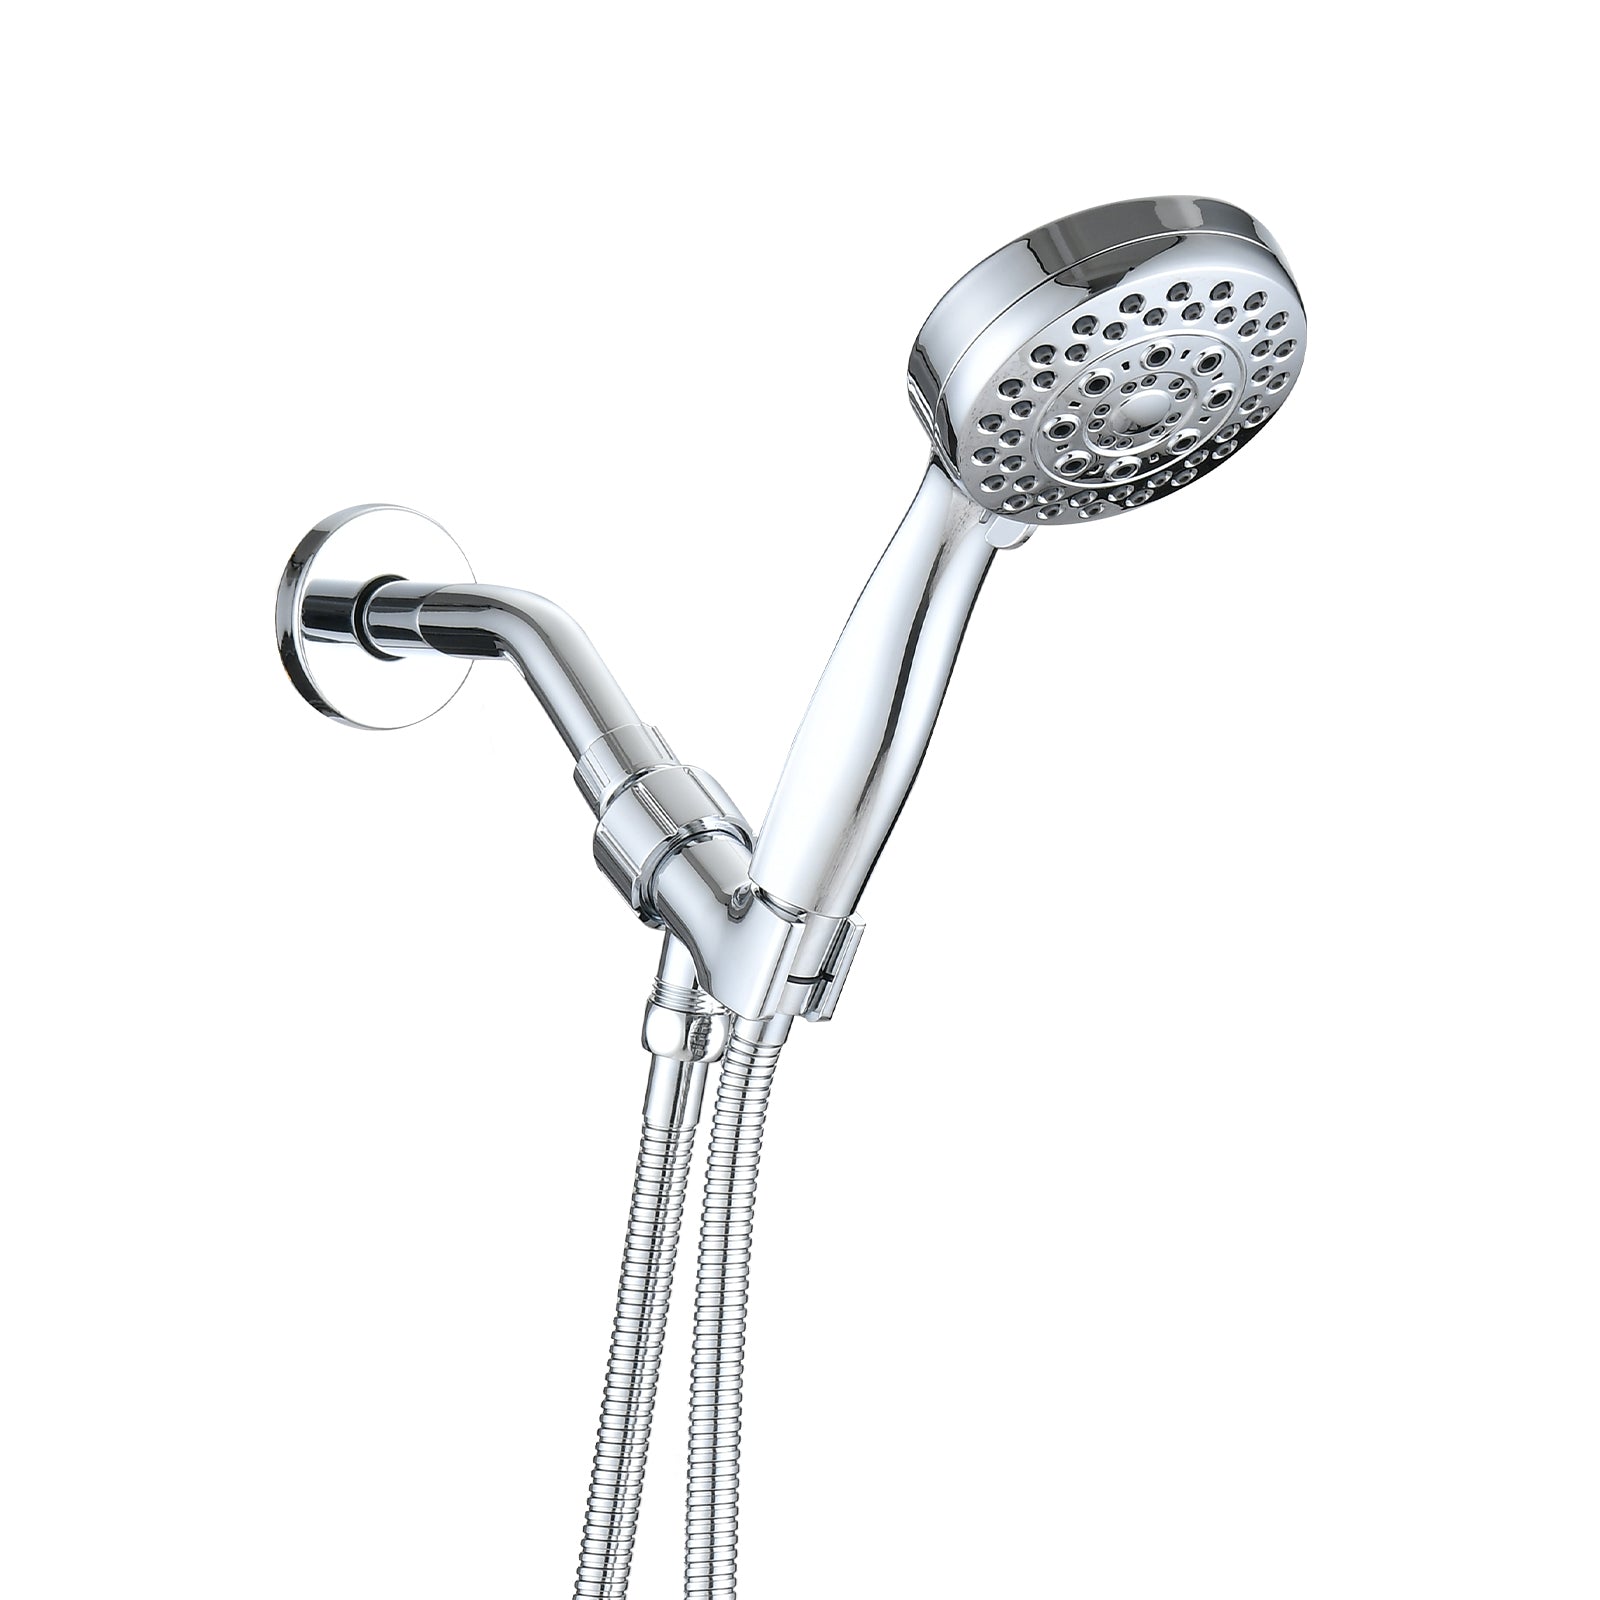 5 Mode Adjustable Settings Handheld Shower Head with